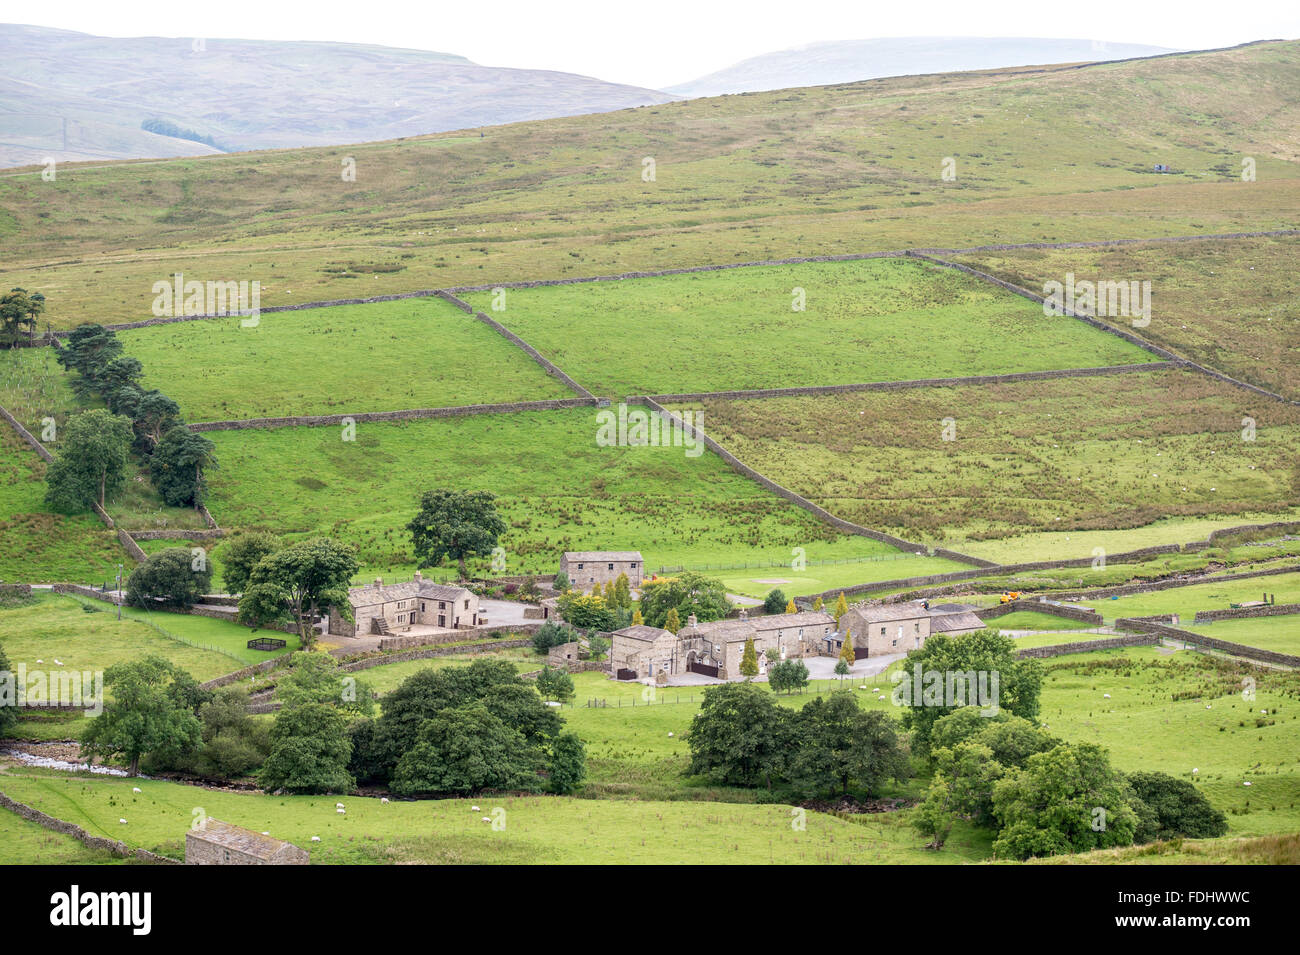 Farm buildings and pastures in the Dales of Yorkshire, England, UK. Stock Photo